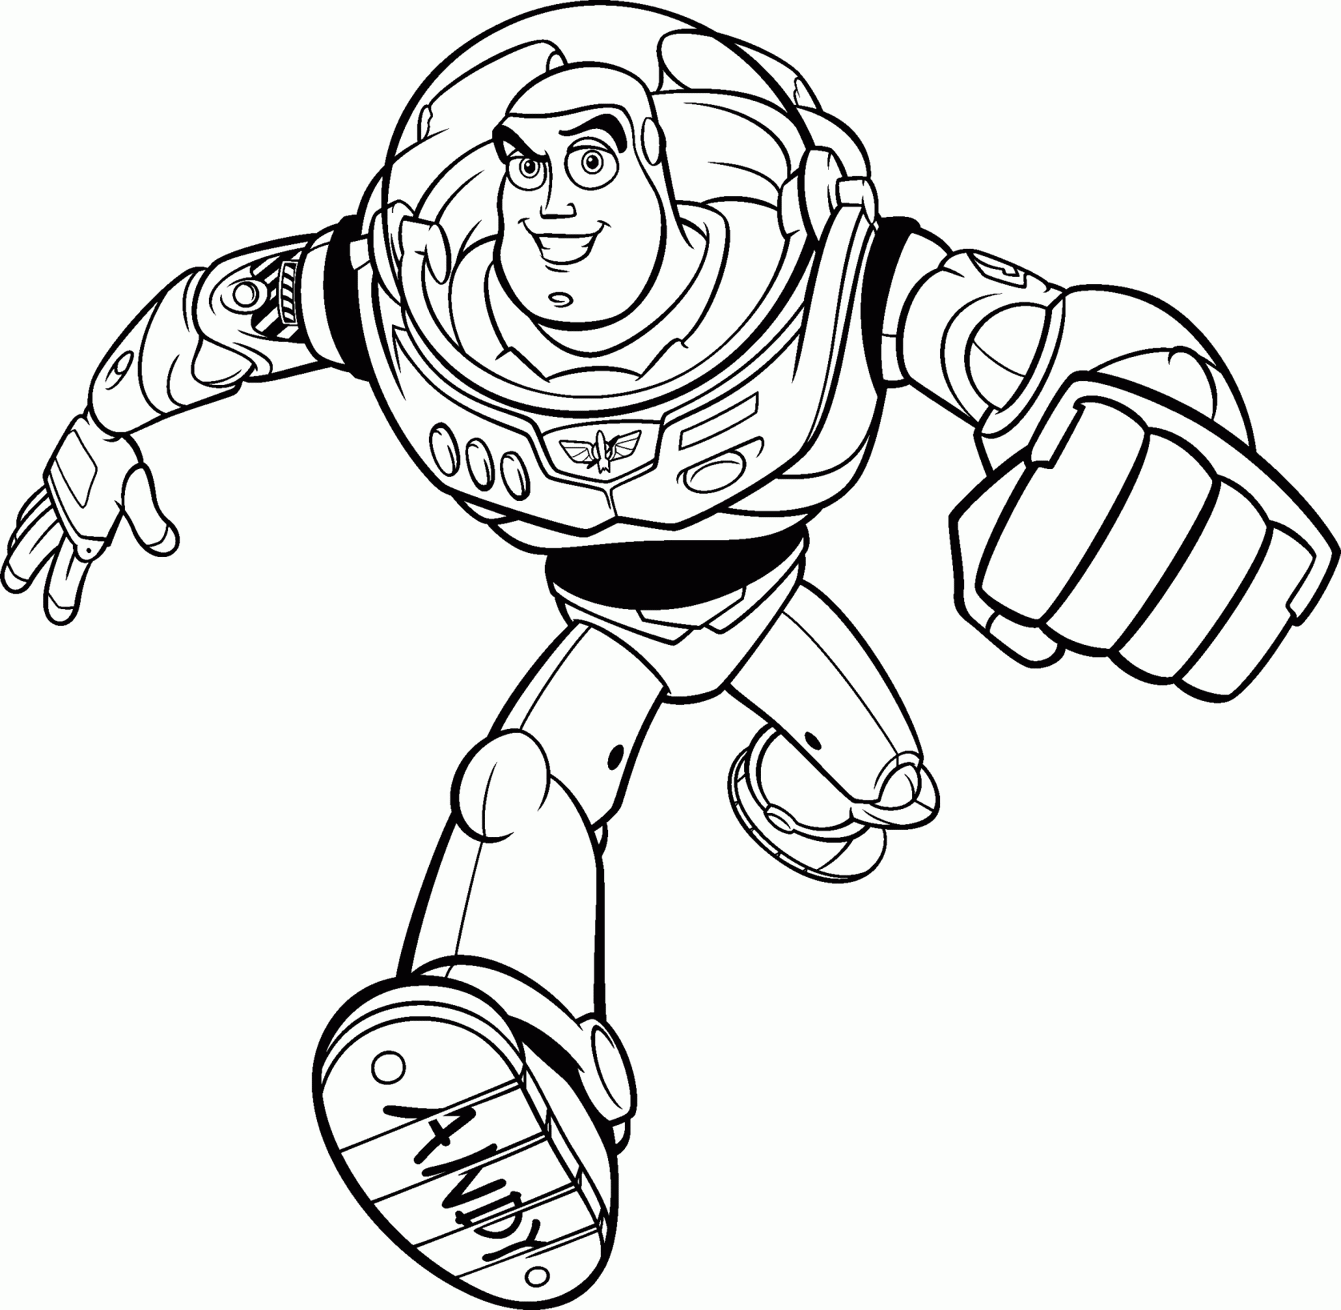 Barbie Toy Story 3 Coloring Pages - Coloring Page